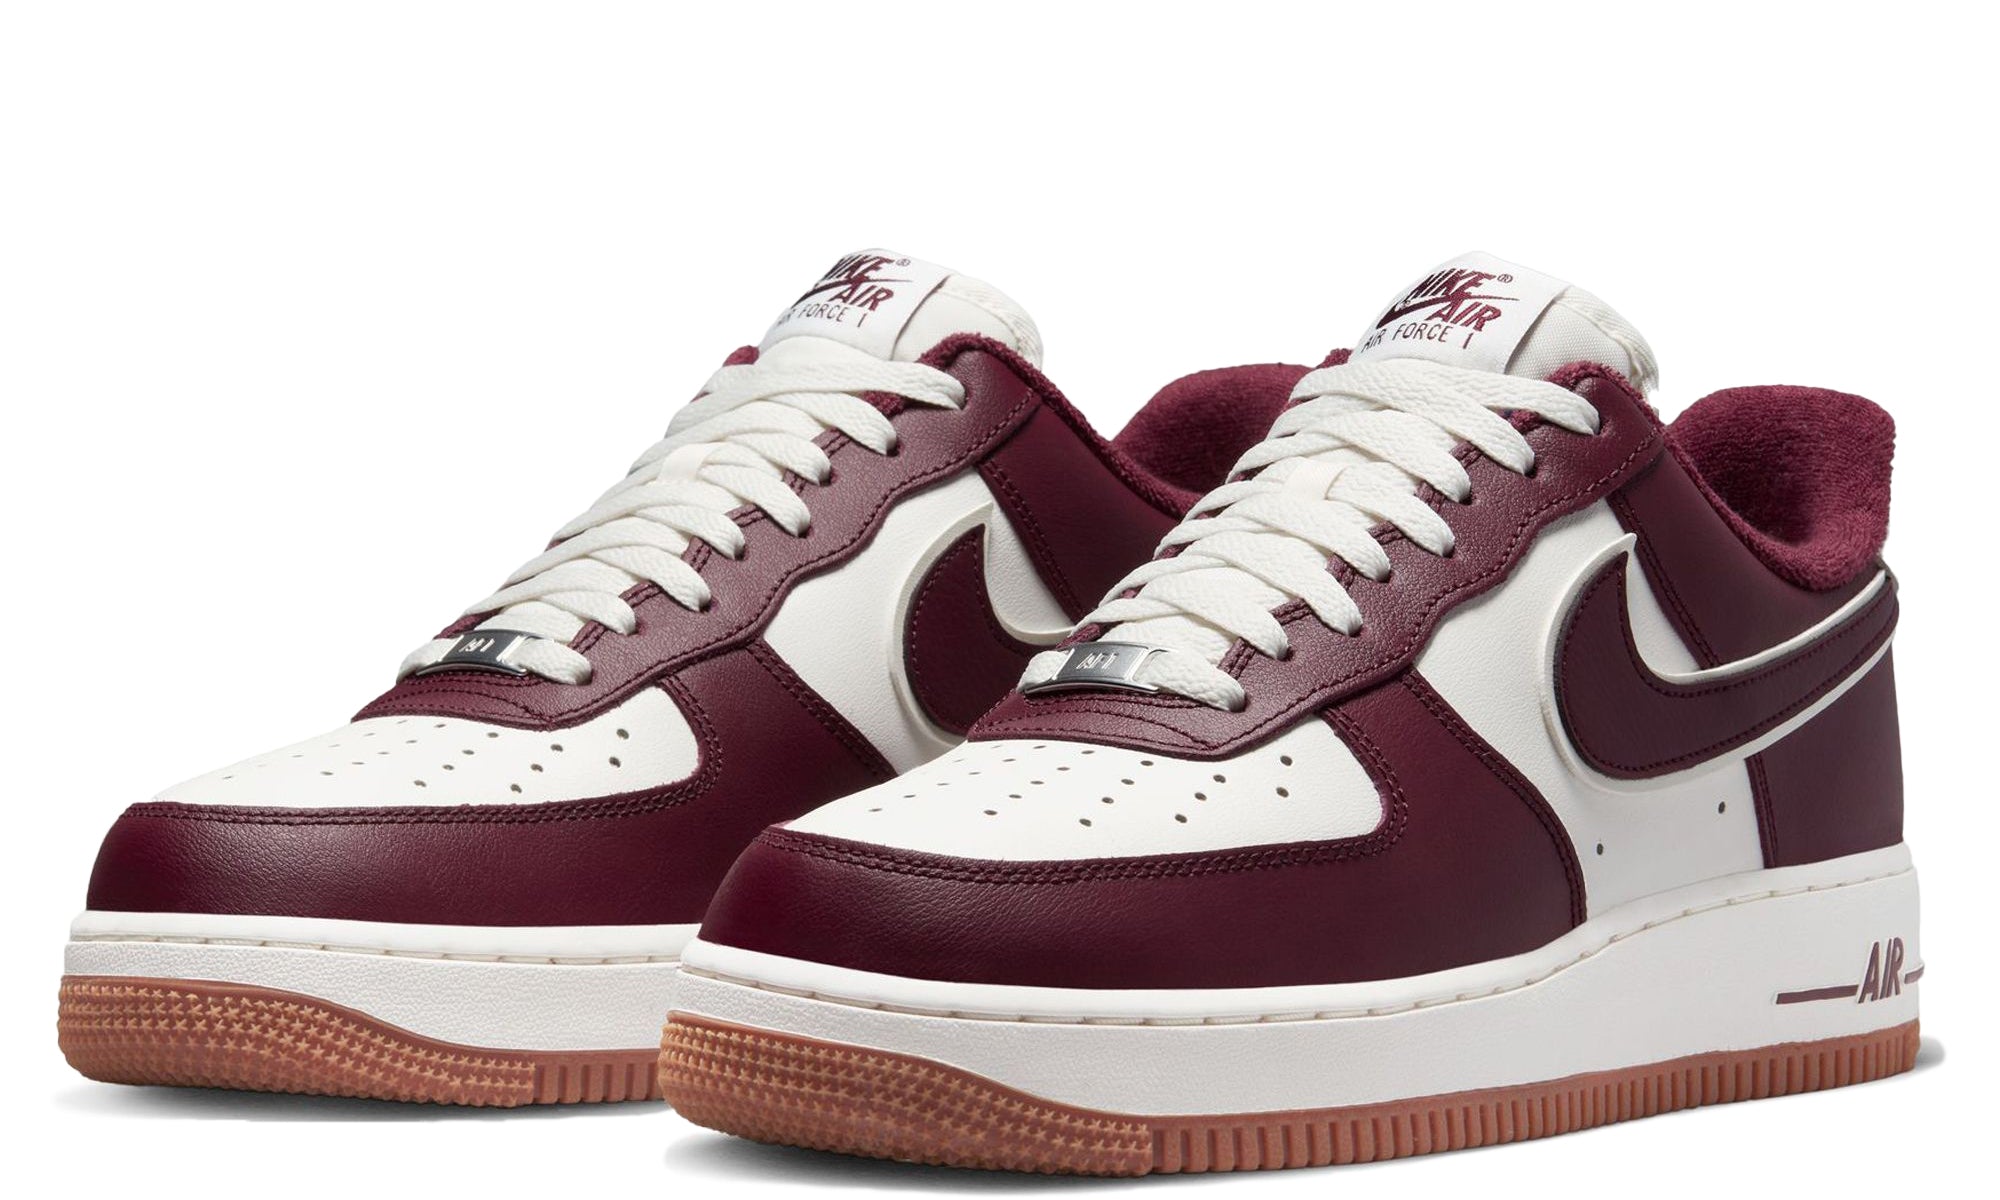 Nike Air Force 1 '07 Night Maroon Mens Lifestyle Shoes Maroon